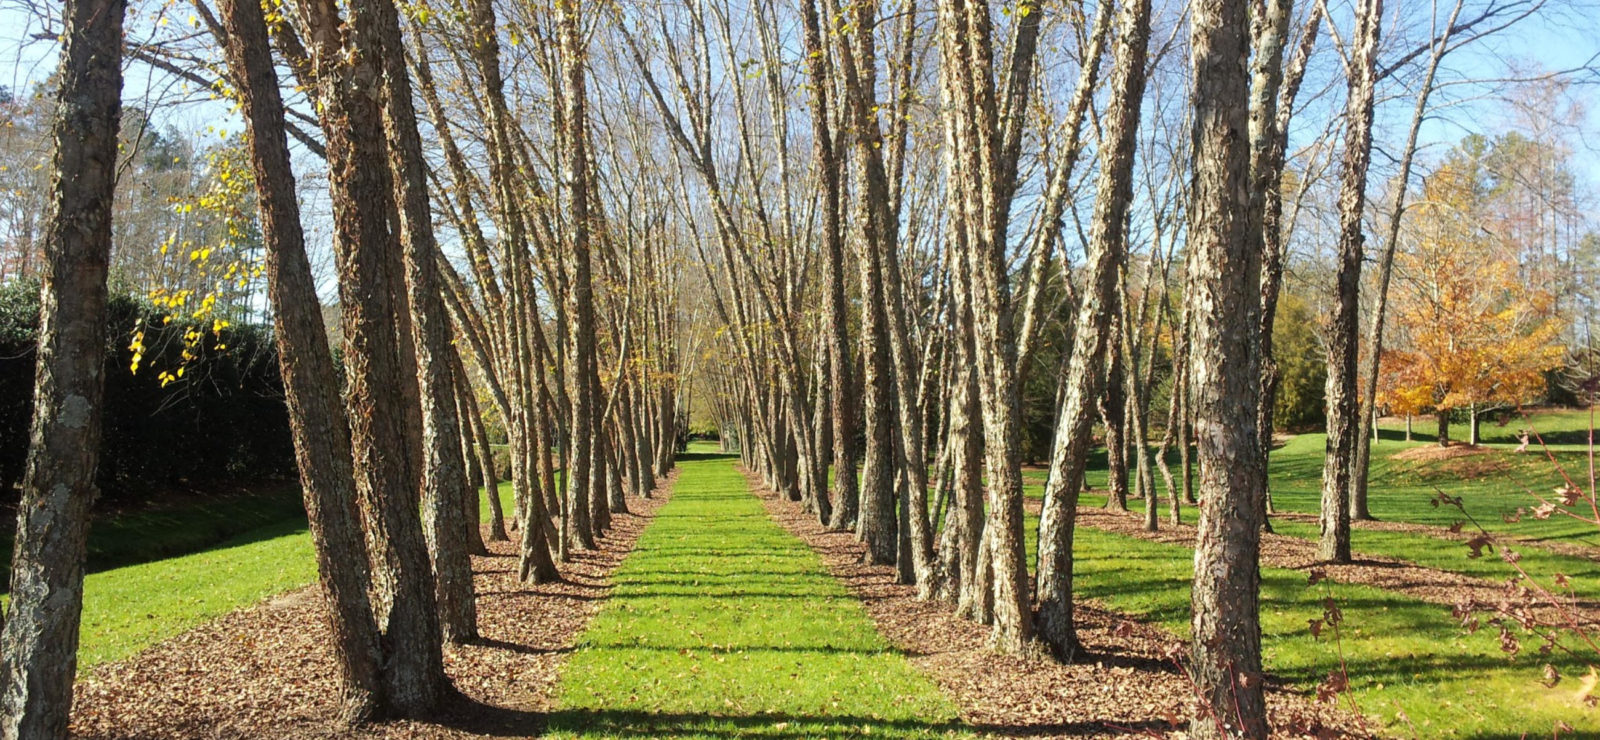 An alle of trees flank a grassy walkway